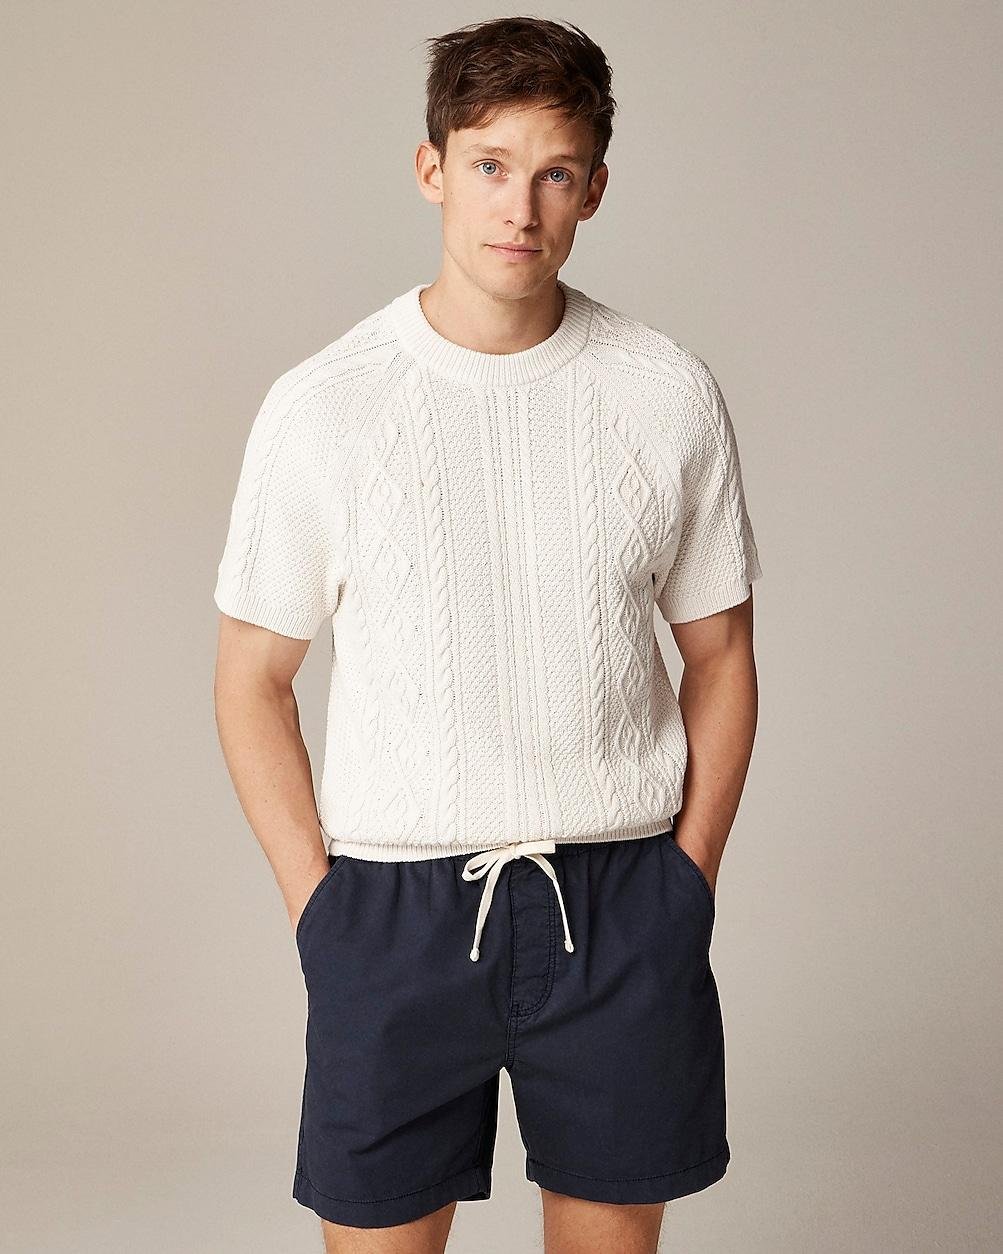 Short-sleeve cotton cable-knit sweater by J.CREW